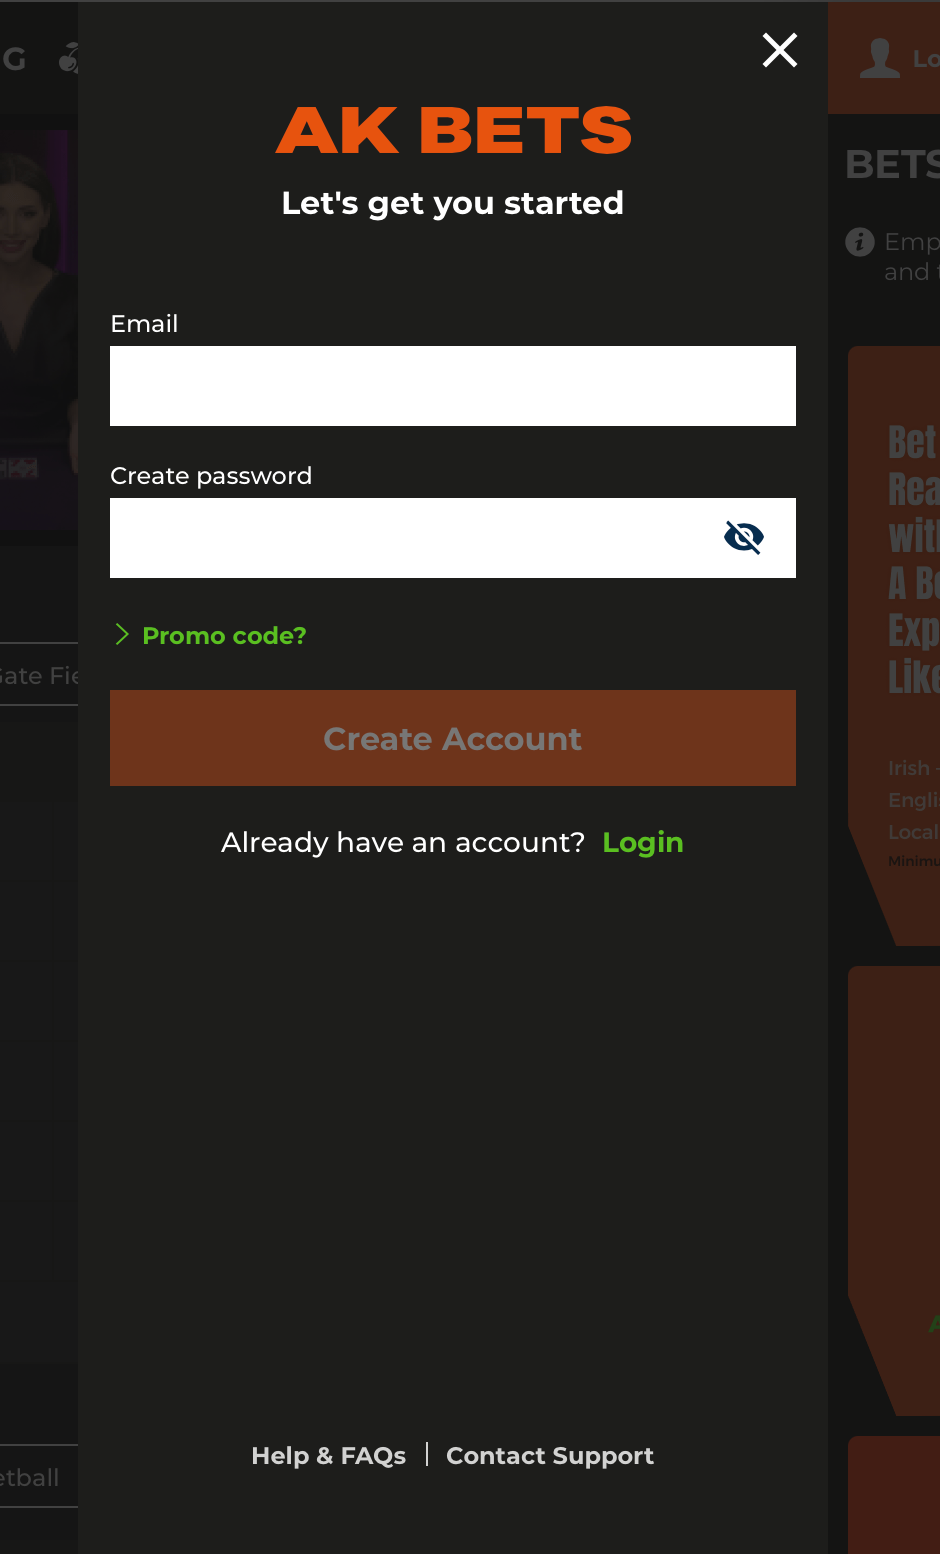 Enter your email address and a password